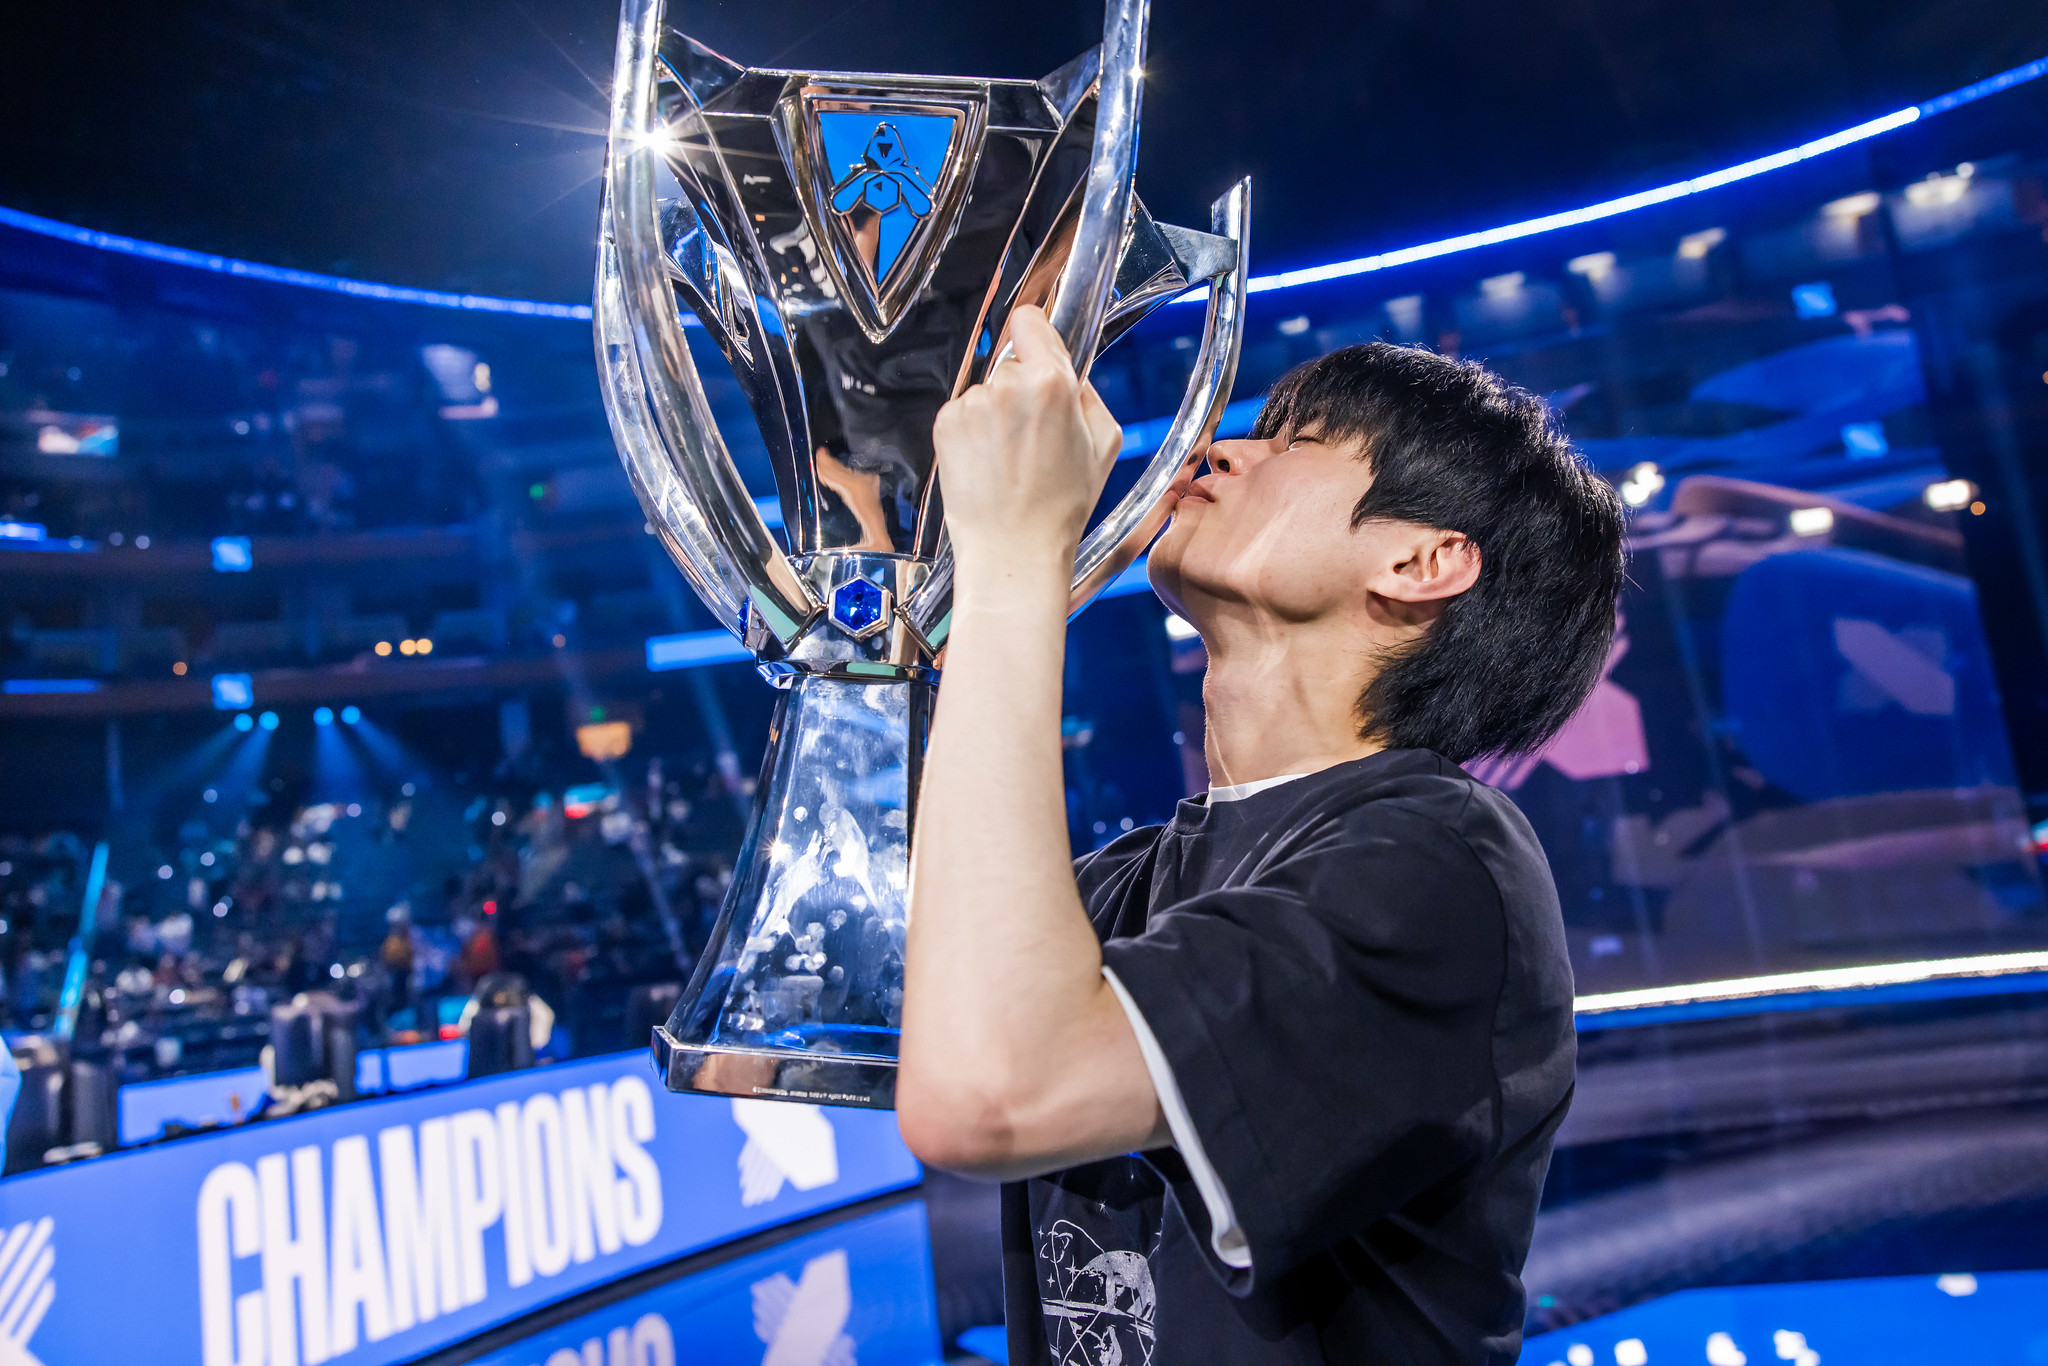 SAN FRANCISCO, CALIFORNIA - NOVEMBER 05: Kim "Deft" Hyuk-kyu of DRX poses with the Summoners Cup in hand after victory at the League of Legends World Championship Finals on November 5, 2022 in San Francisco, CA. (Photo by Colin Young-Wolff/Riot Games)